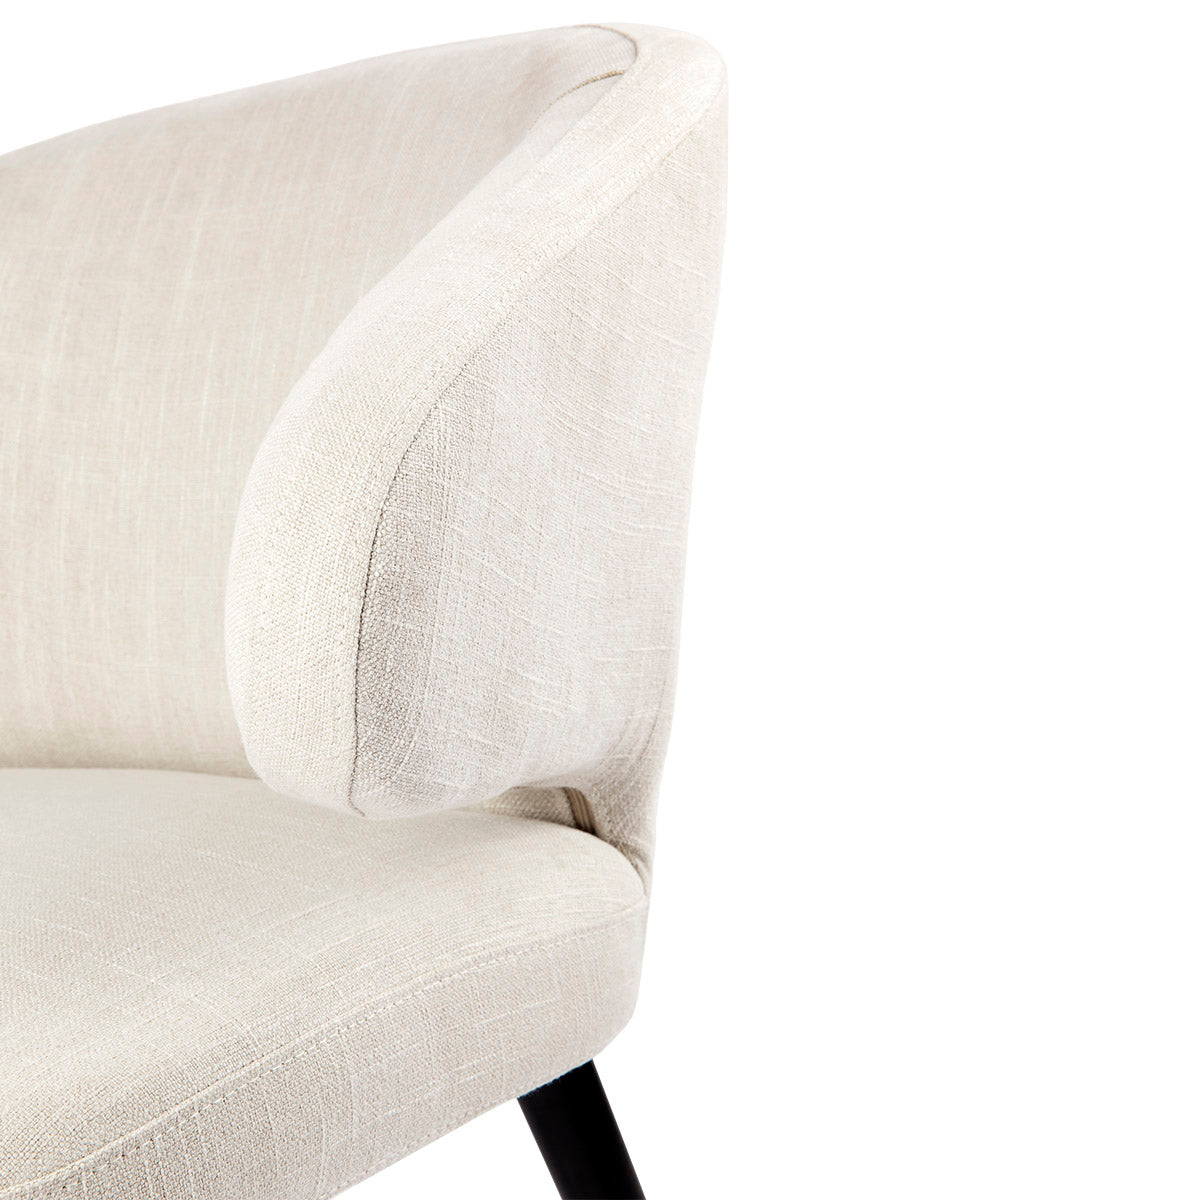 Harlow Black Dining Chair - Natural Linen